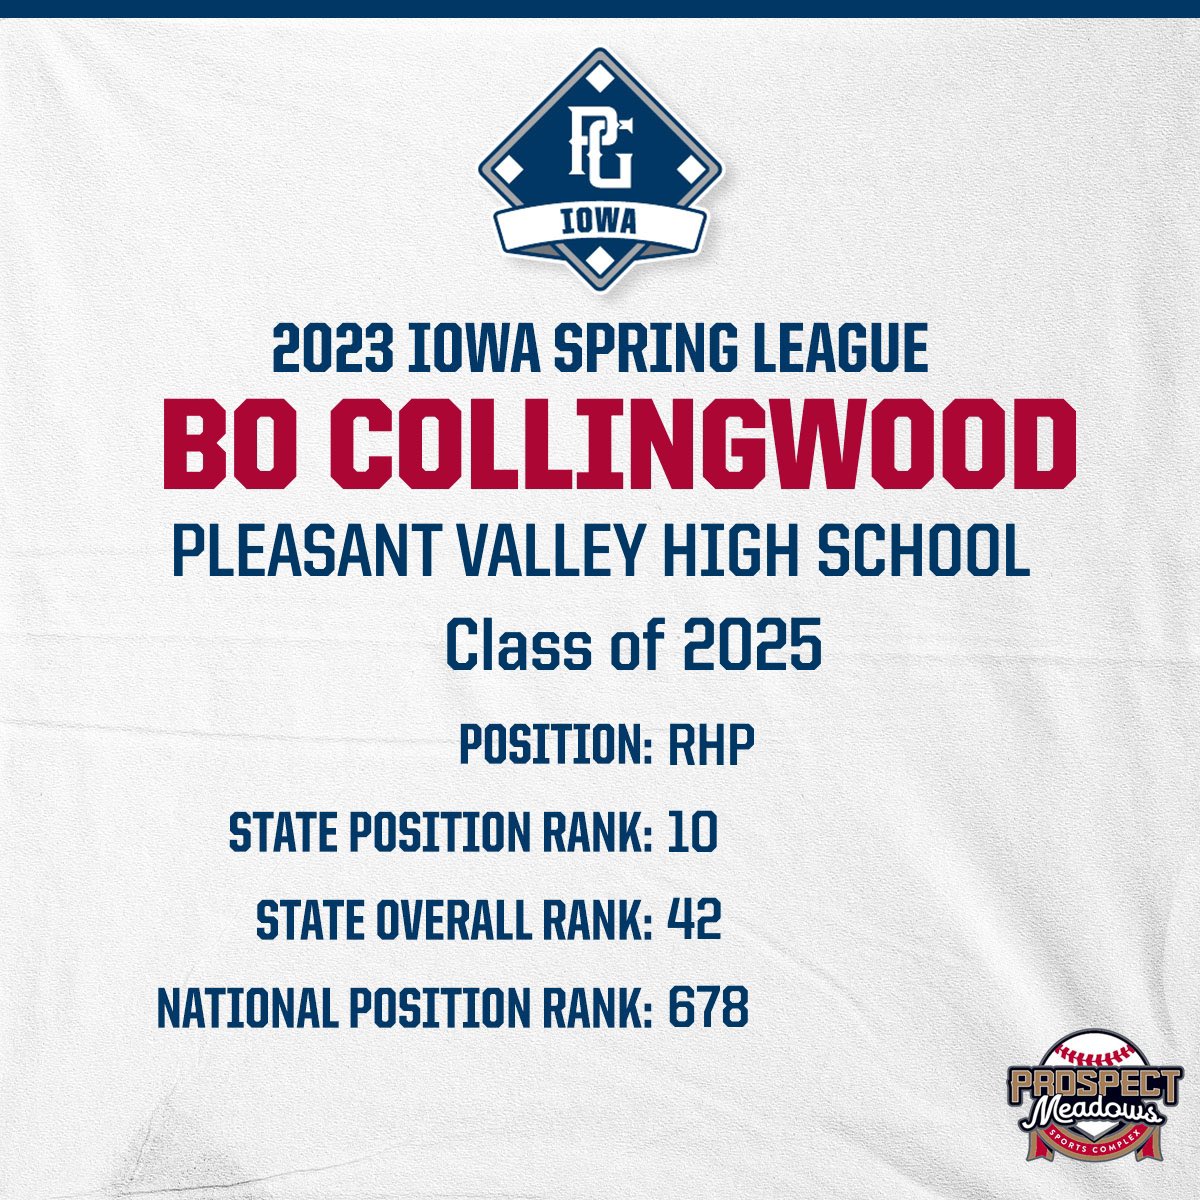 PLAYER SPOTLIGHT Bo Collingwood A RHP from Pleasant Valley High School!